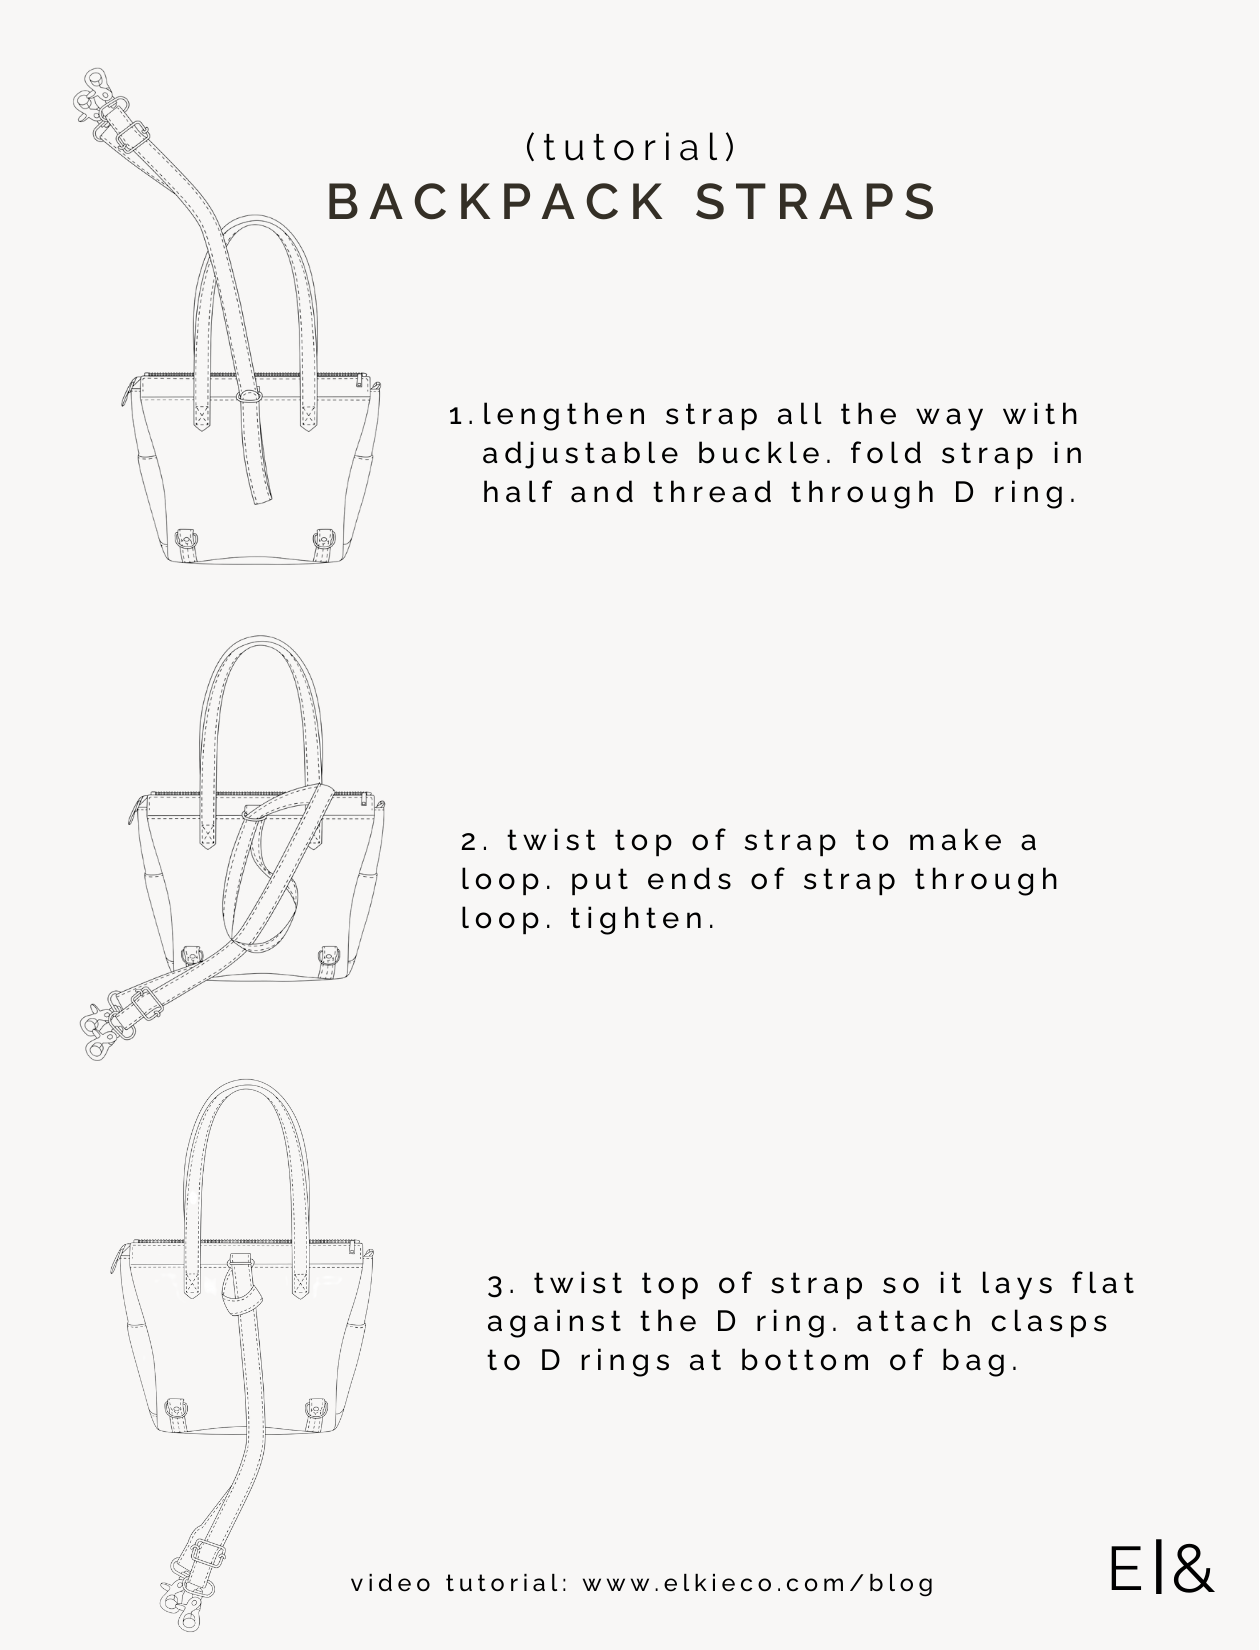 How to fold the backpack straps 